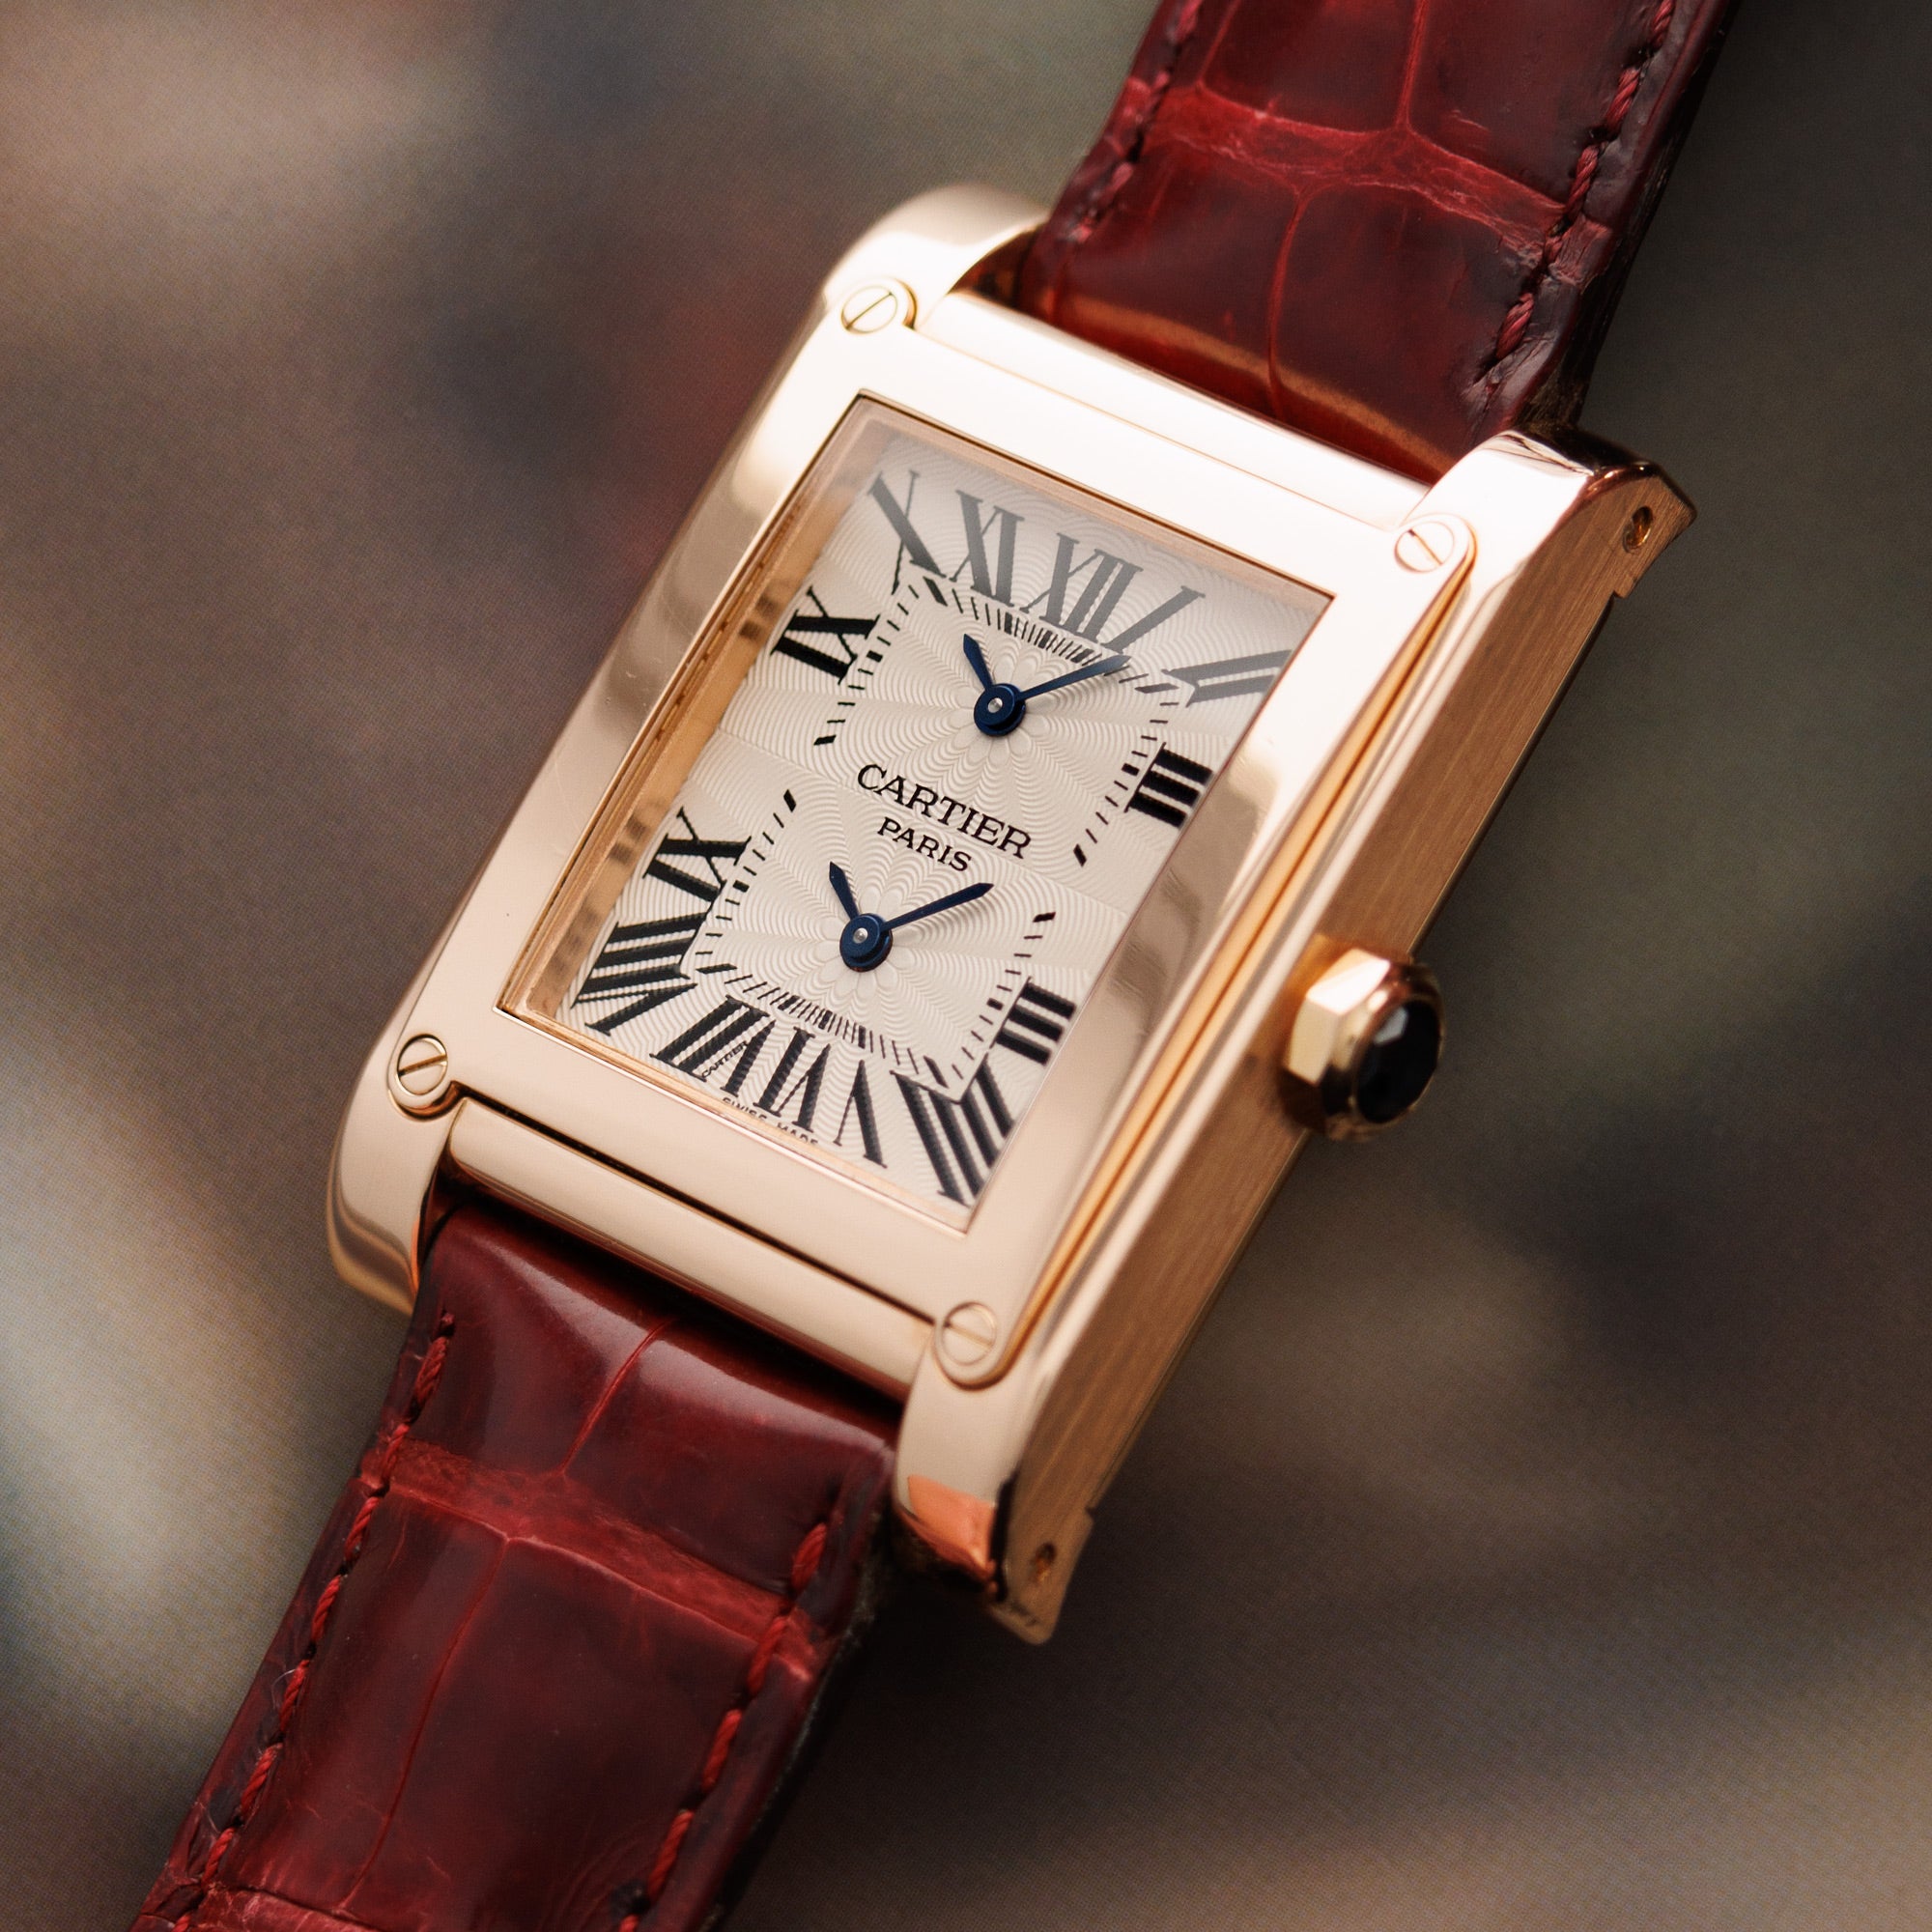 Cartier - Cartier Rose Gold Tank a Vis Dual Time Ref. 2594 - The Keystone Watches